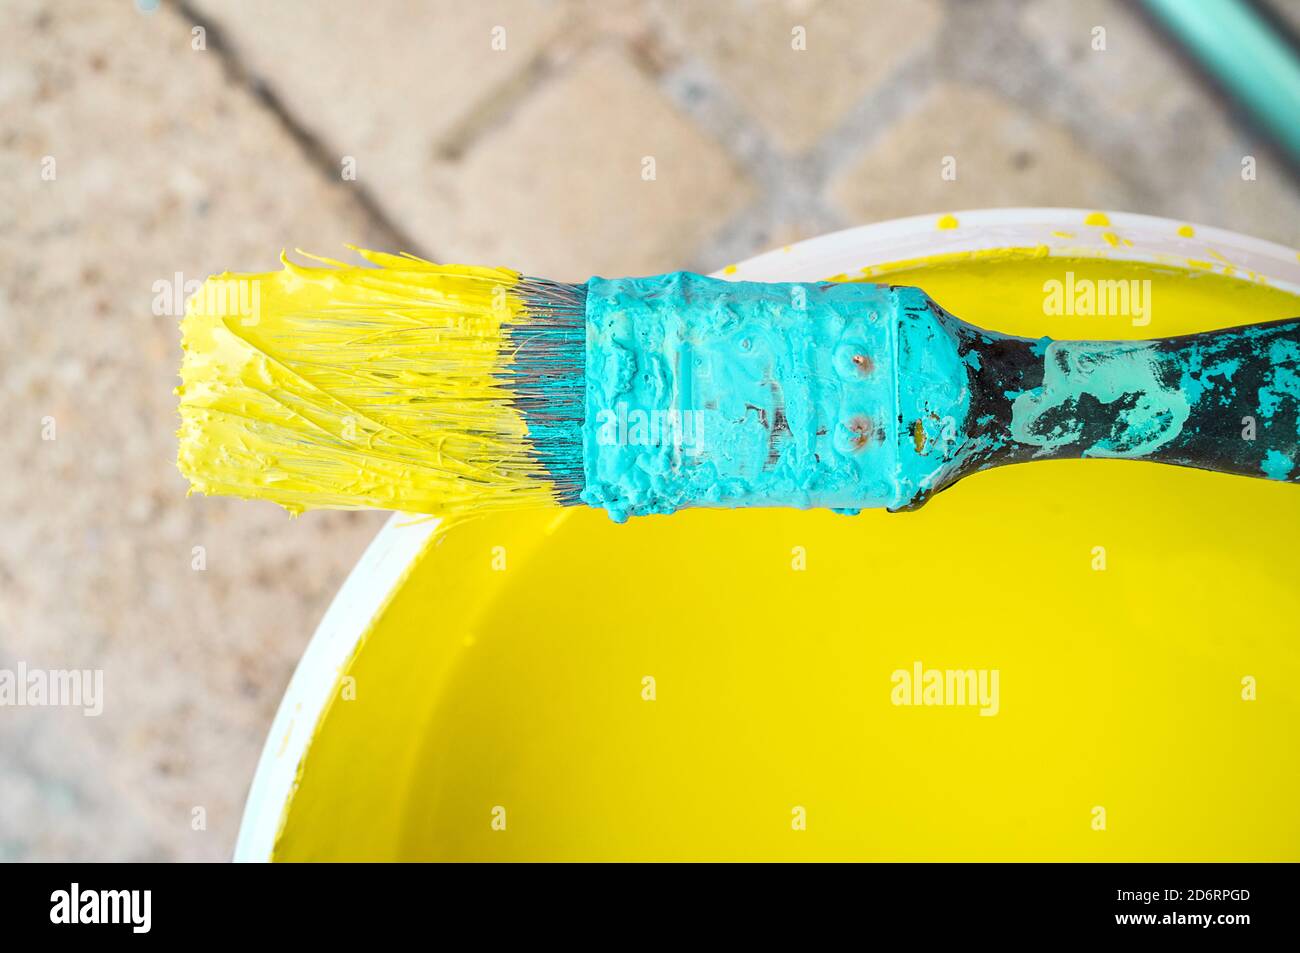 Used flat decorator brush  covered with dry cyan and wet yellow color. Closeup Stock Photo